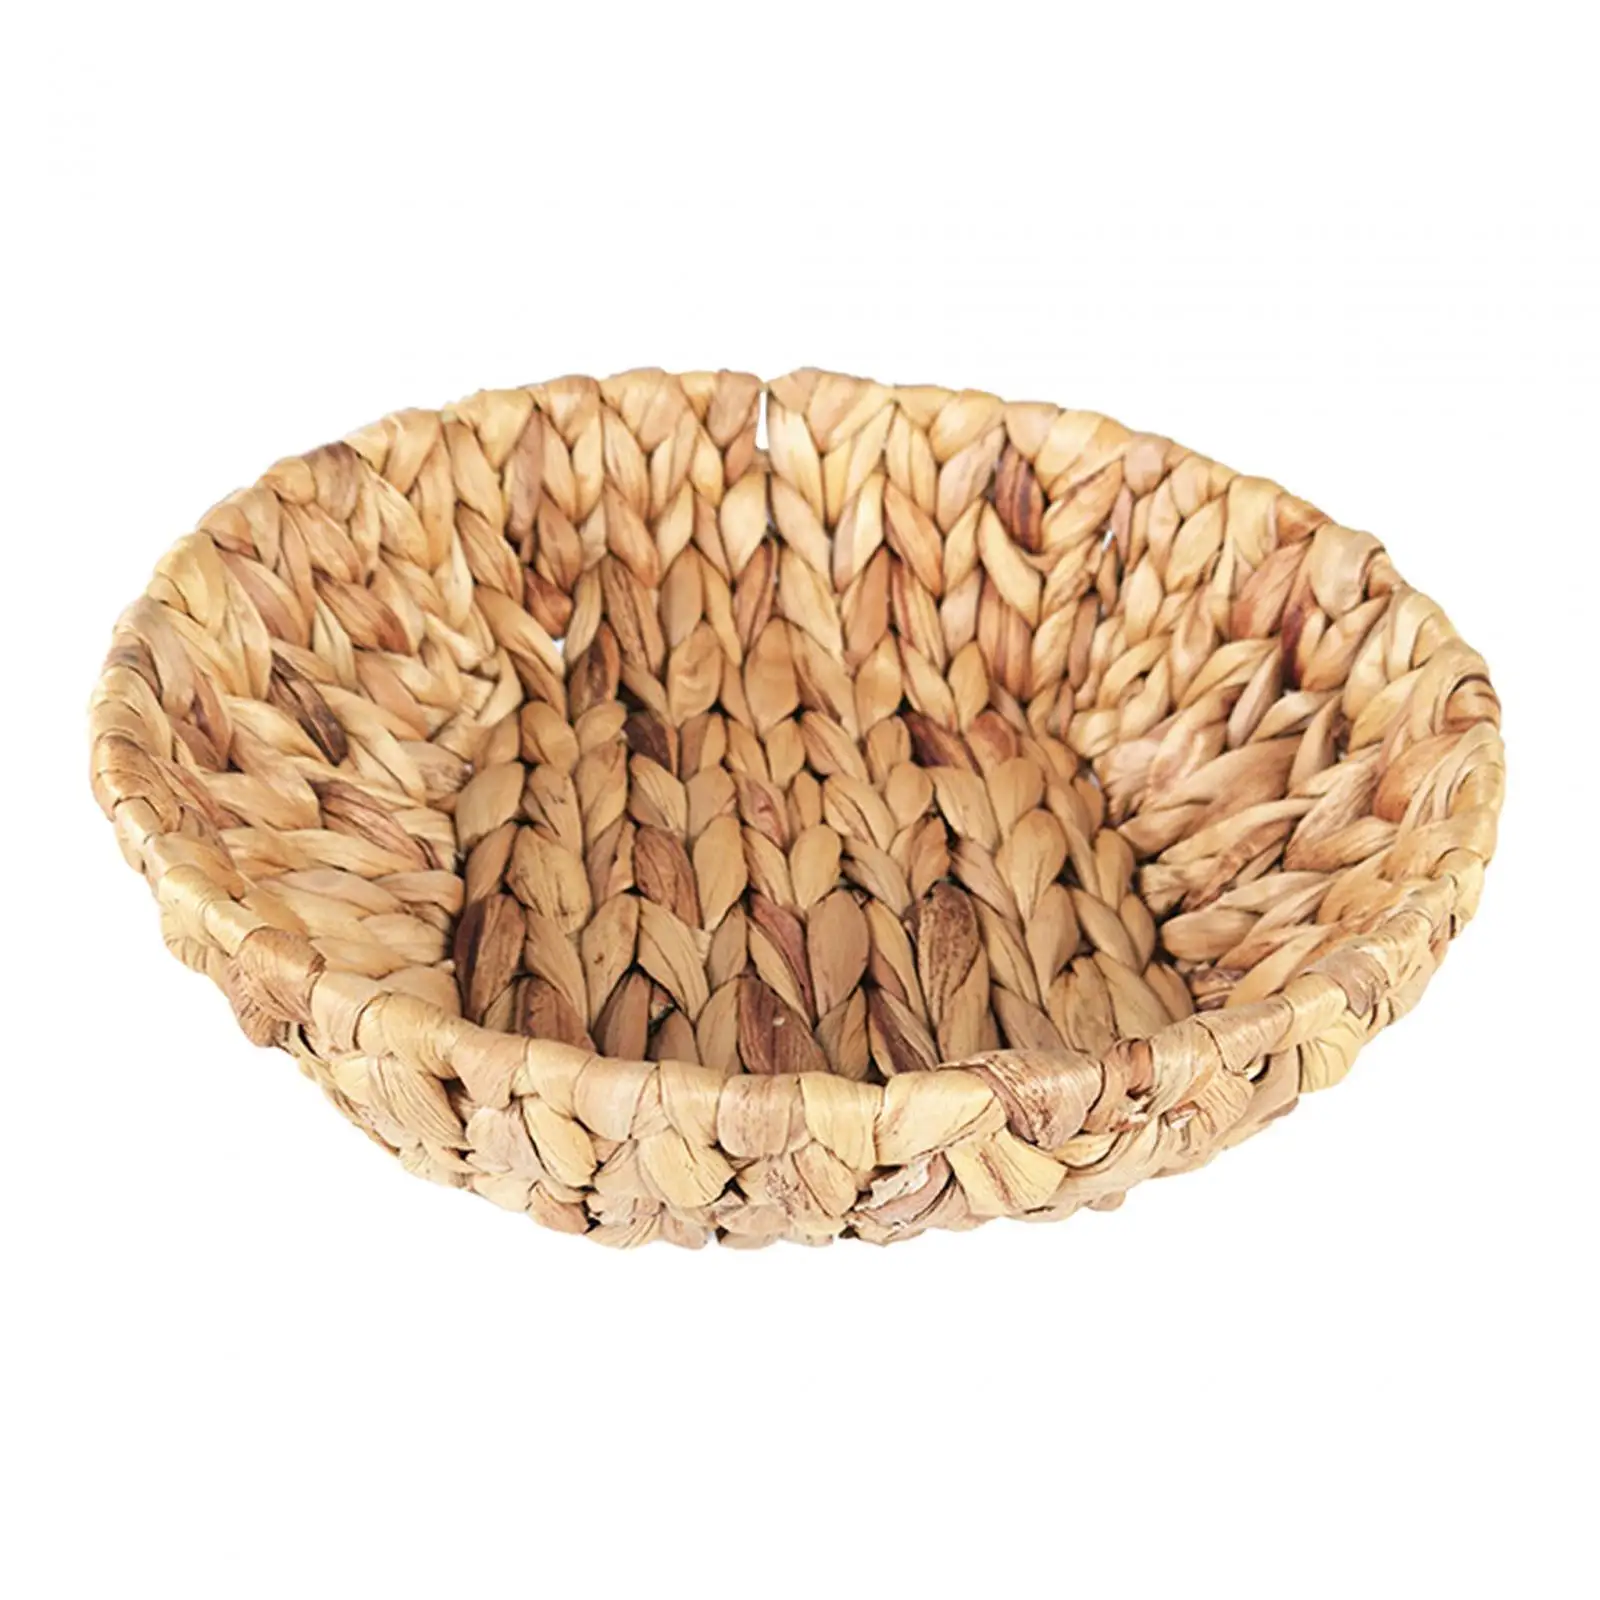 Wicker Serving Tray Snack Candy Storage Basket for Coffee Table Dinner Arts and Crafts Vegetable Tea Party